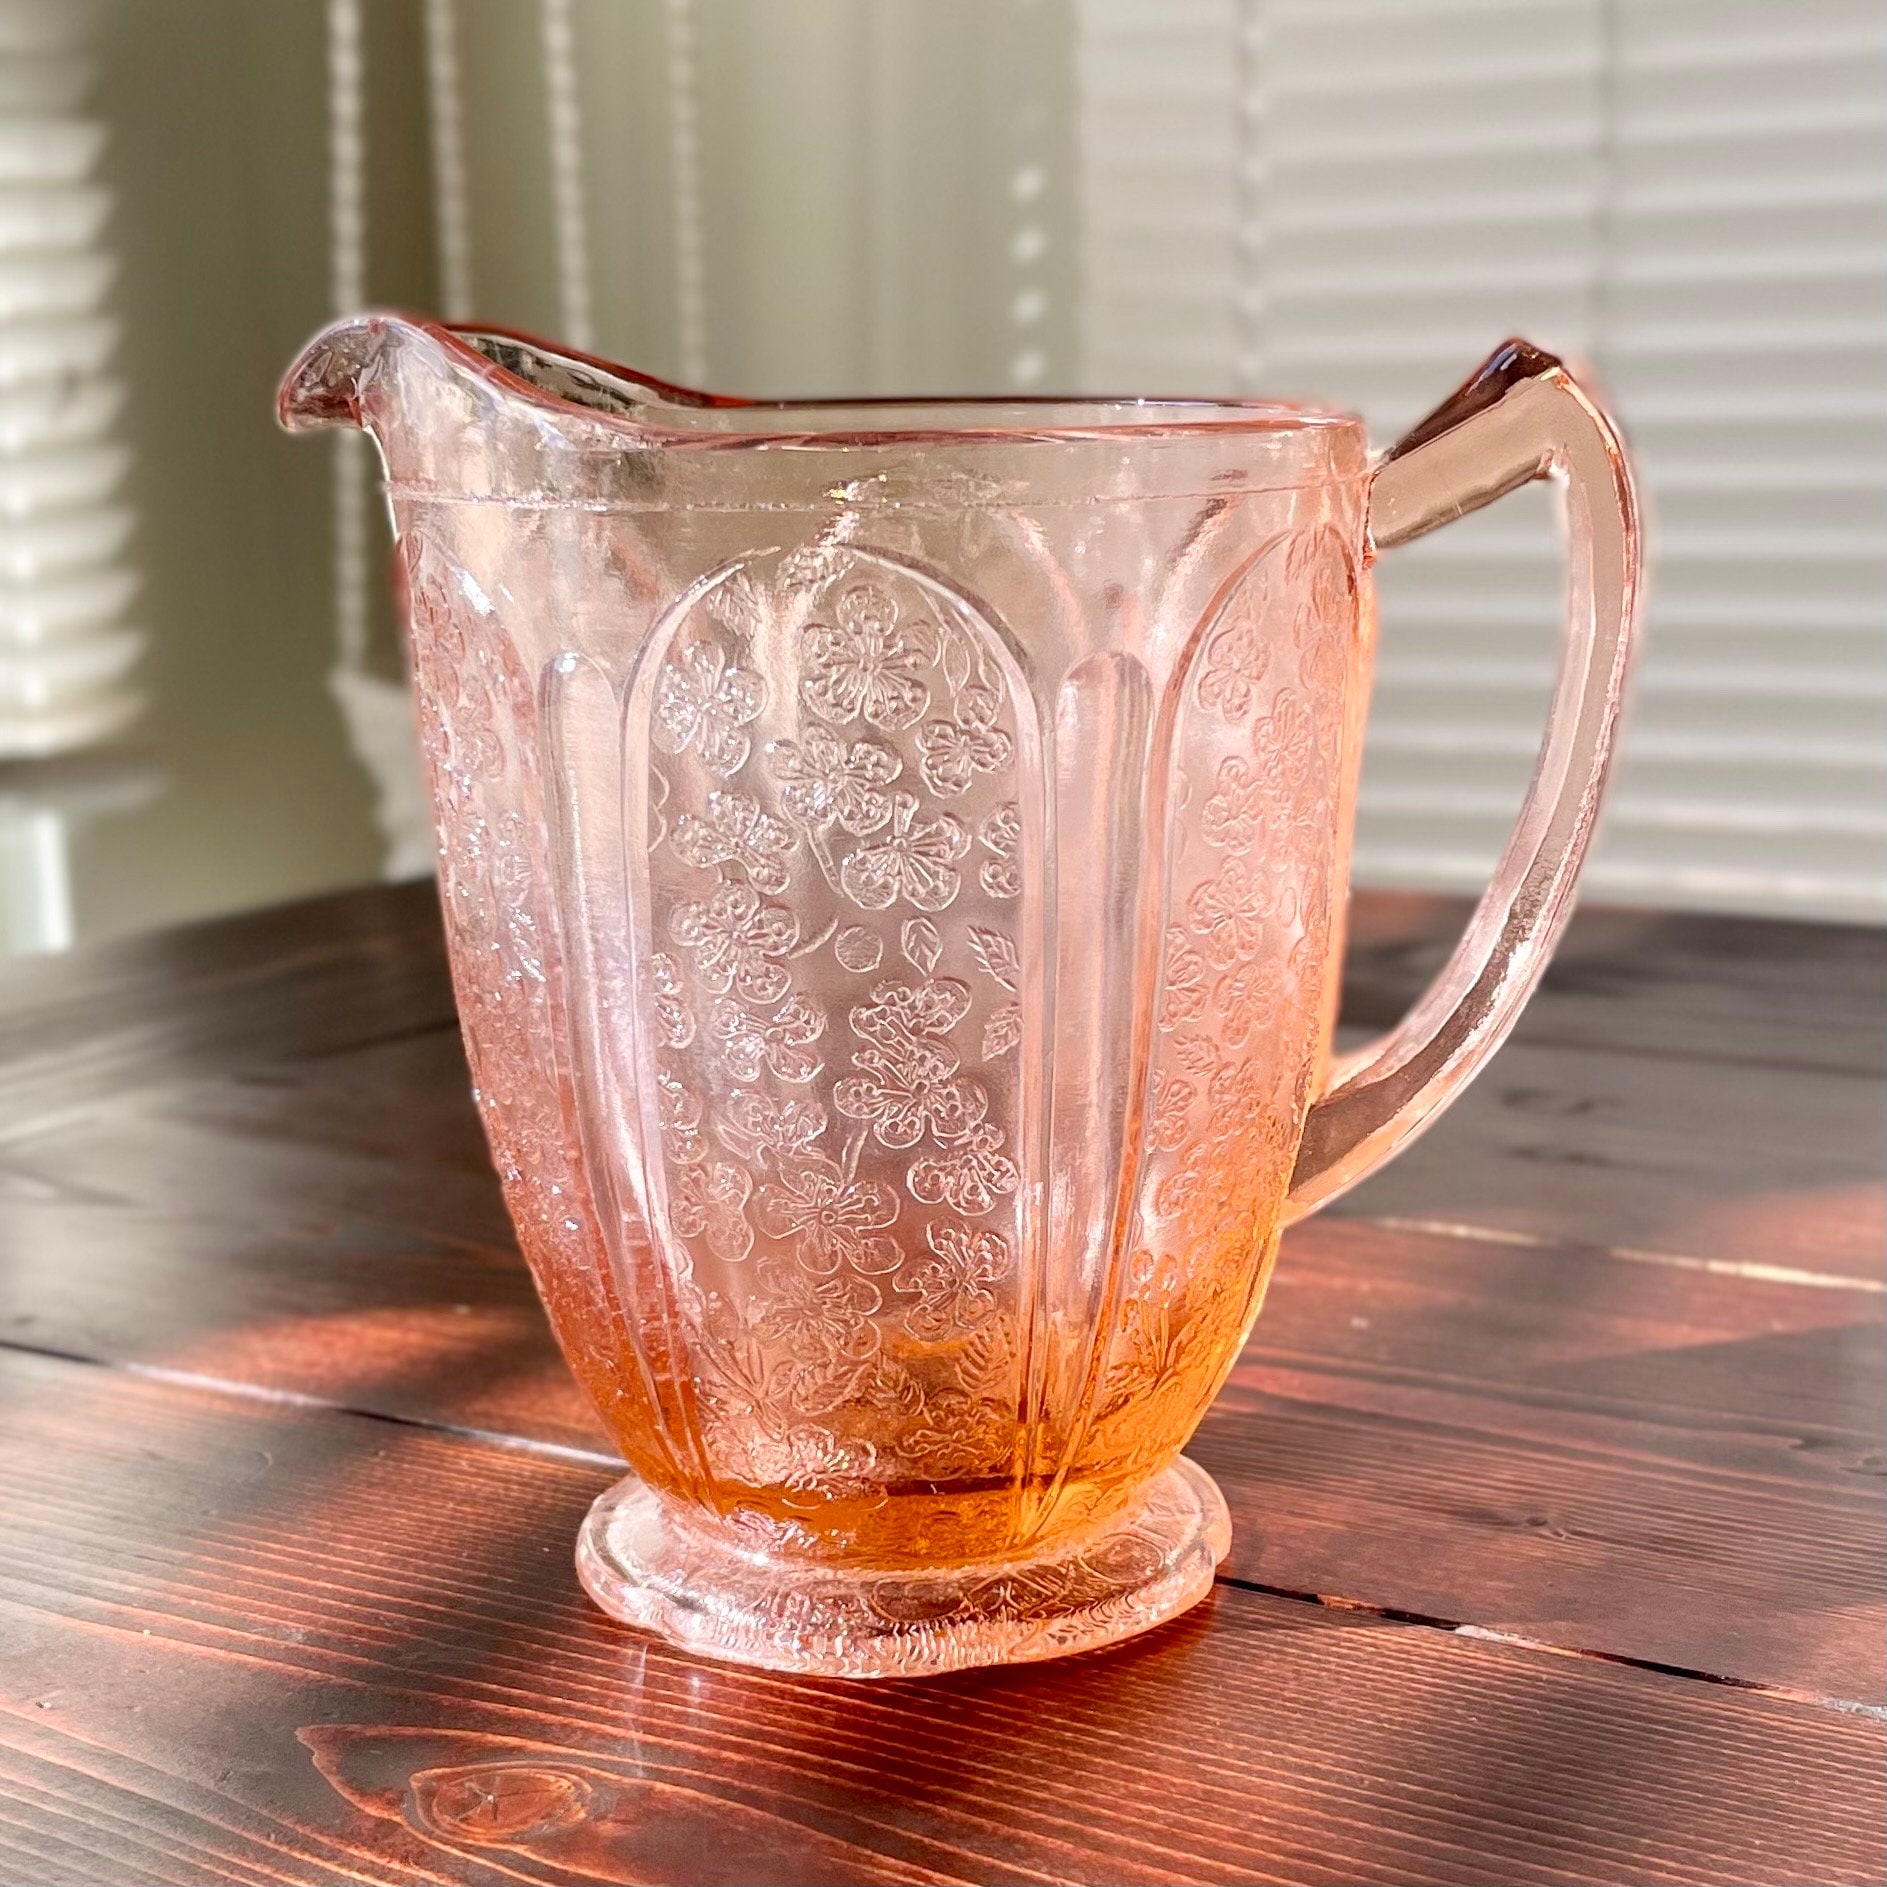 Glass 2 Quart Serving Drink Pitcher Red Cherries Green Leaves – Olde  Kitchen & Home